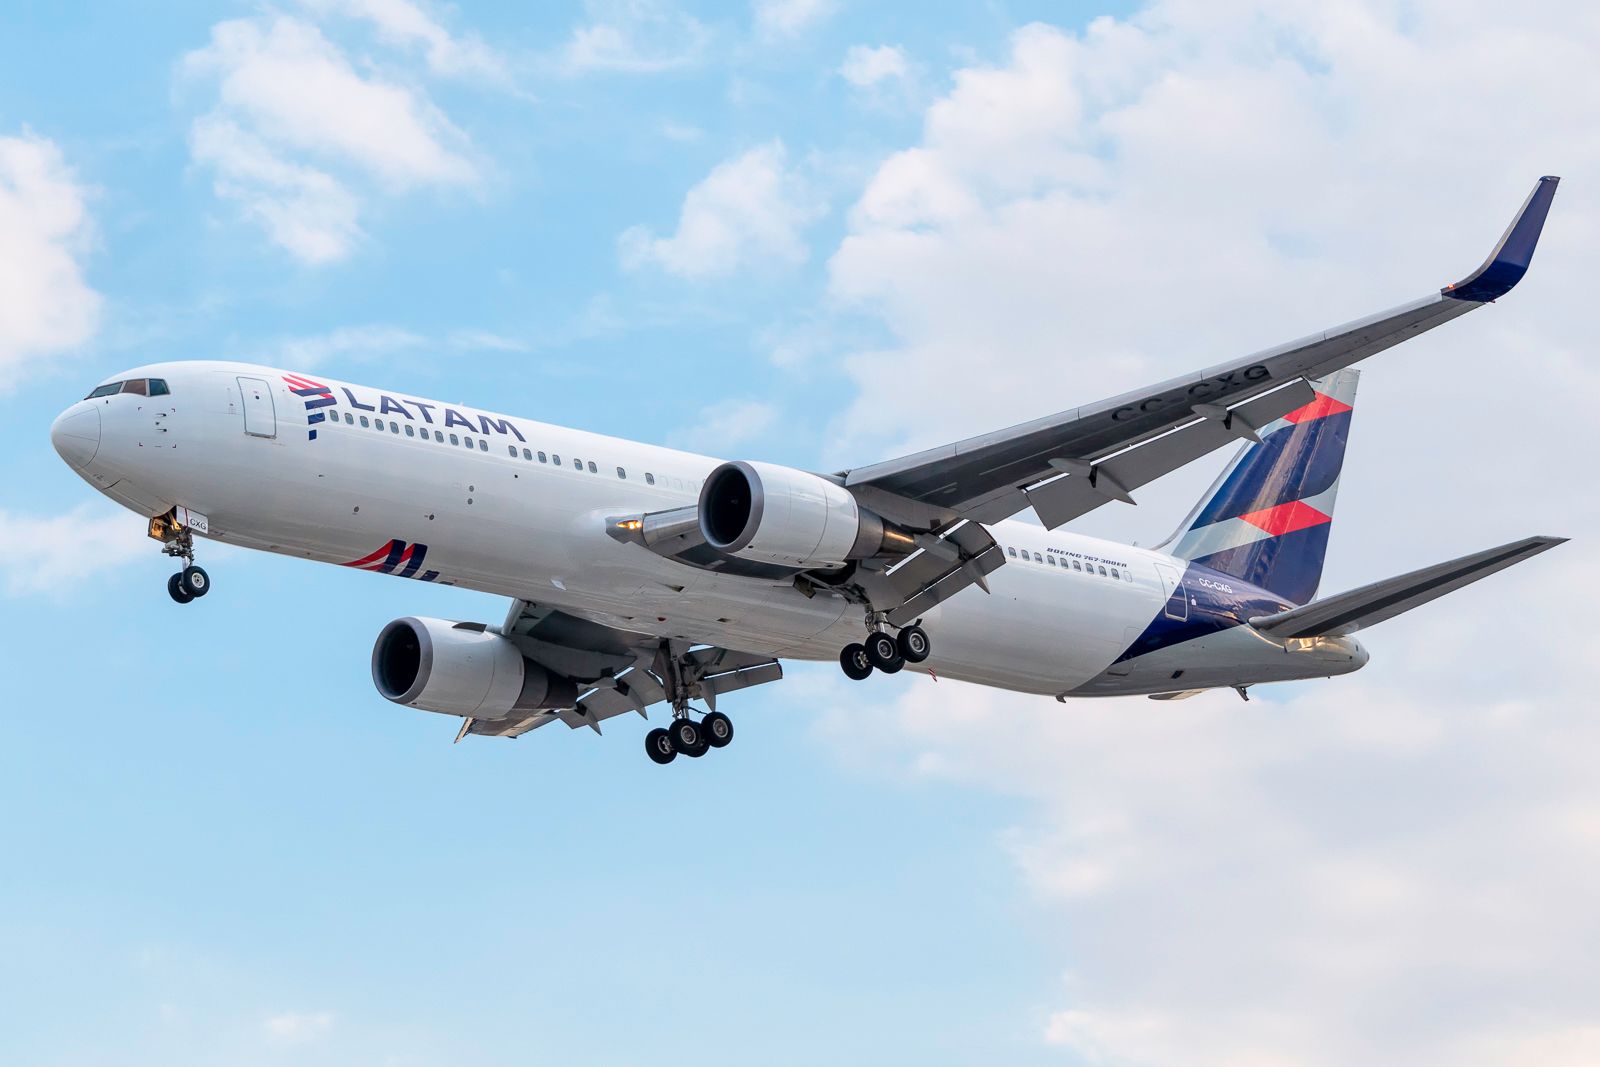 A LATAM Boeing 767-300ER landing in Mexico City